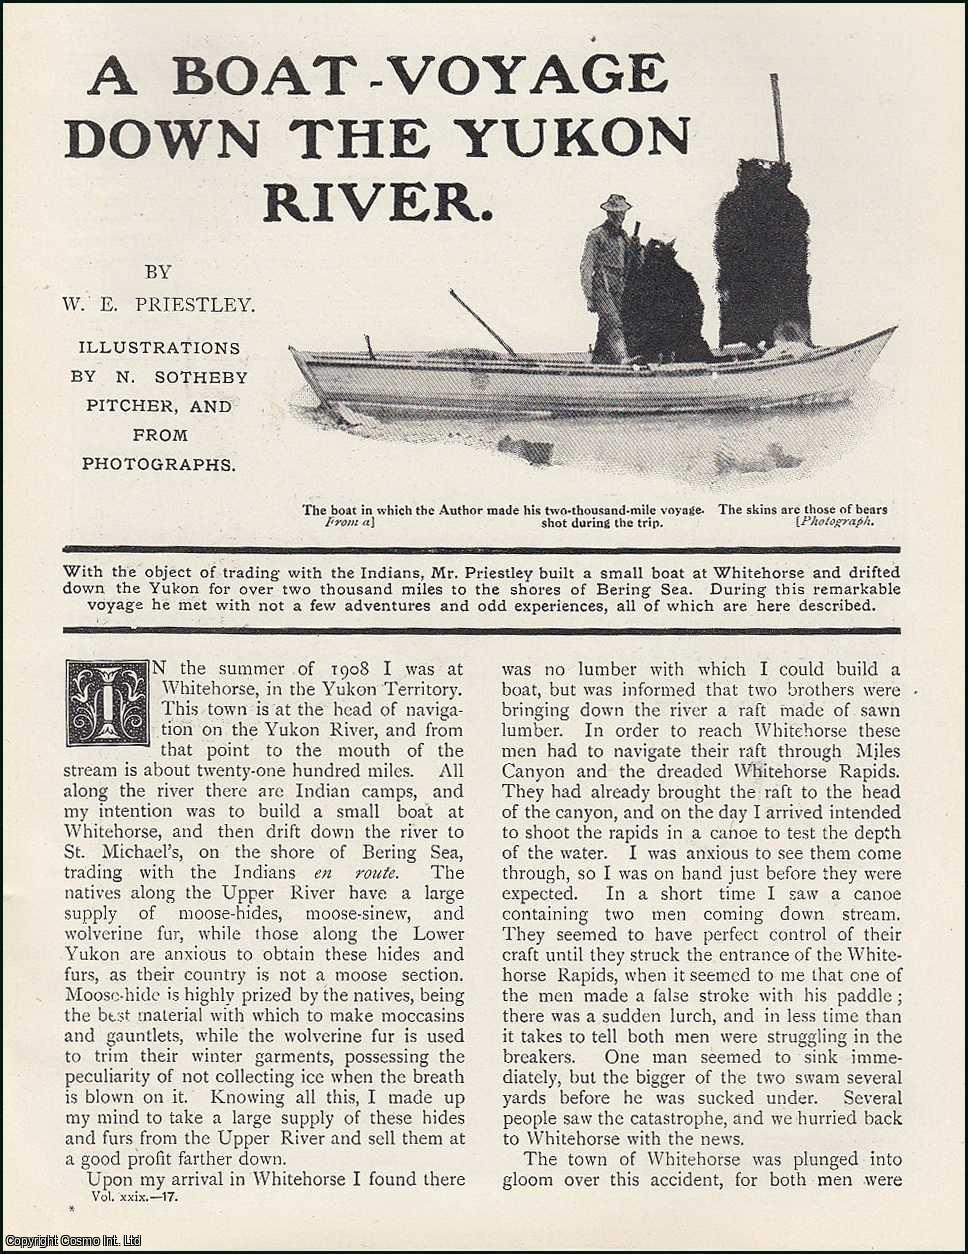 W.E. Priestley. Illustrated by N. Sotheby Pitcher., W. E. - A Boat-Voyage down the Yukon River : 2000 miles from Whitehorse to the Bering Sea. An uncommon original article from the Wide World Magazine, 1912.